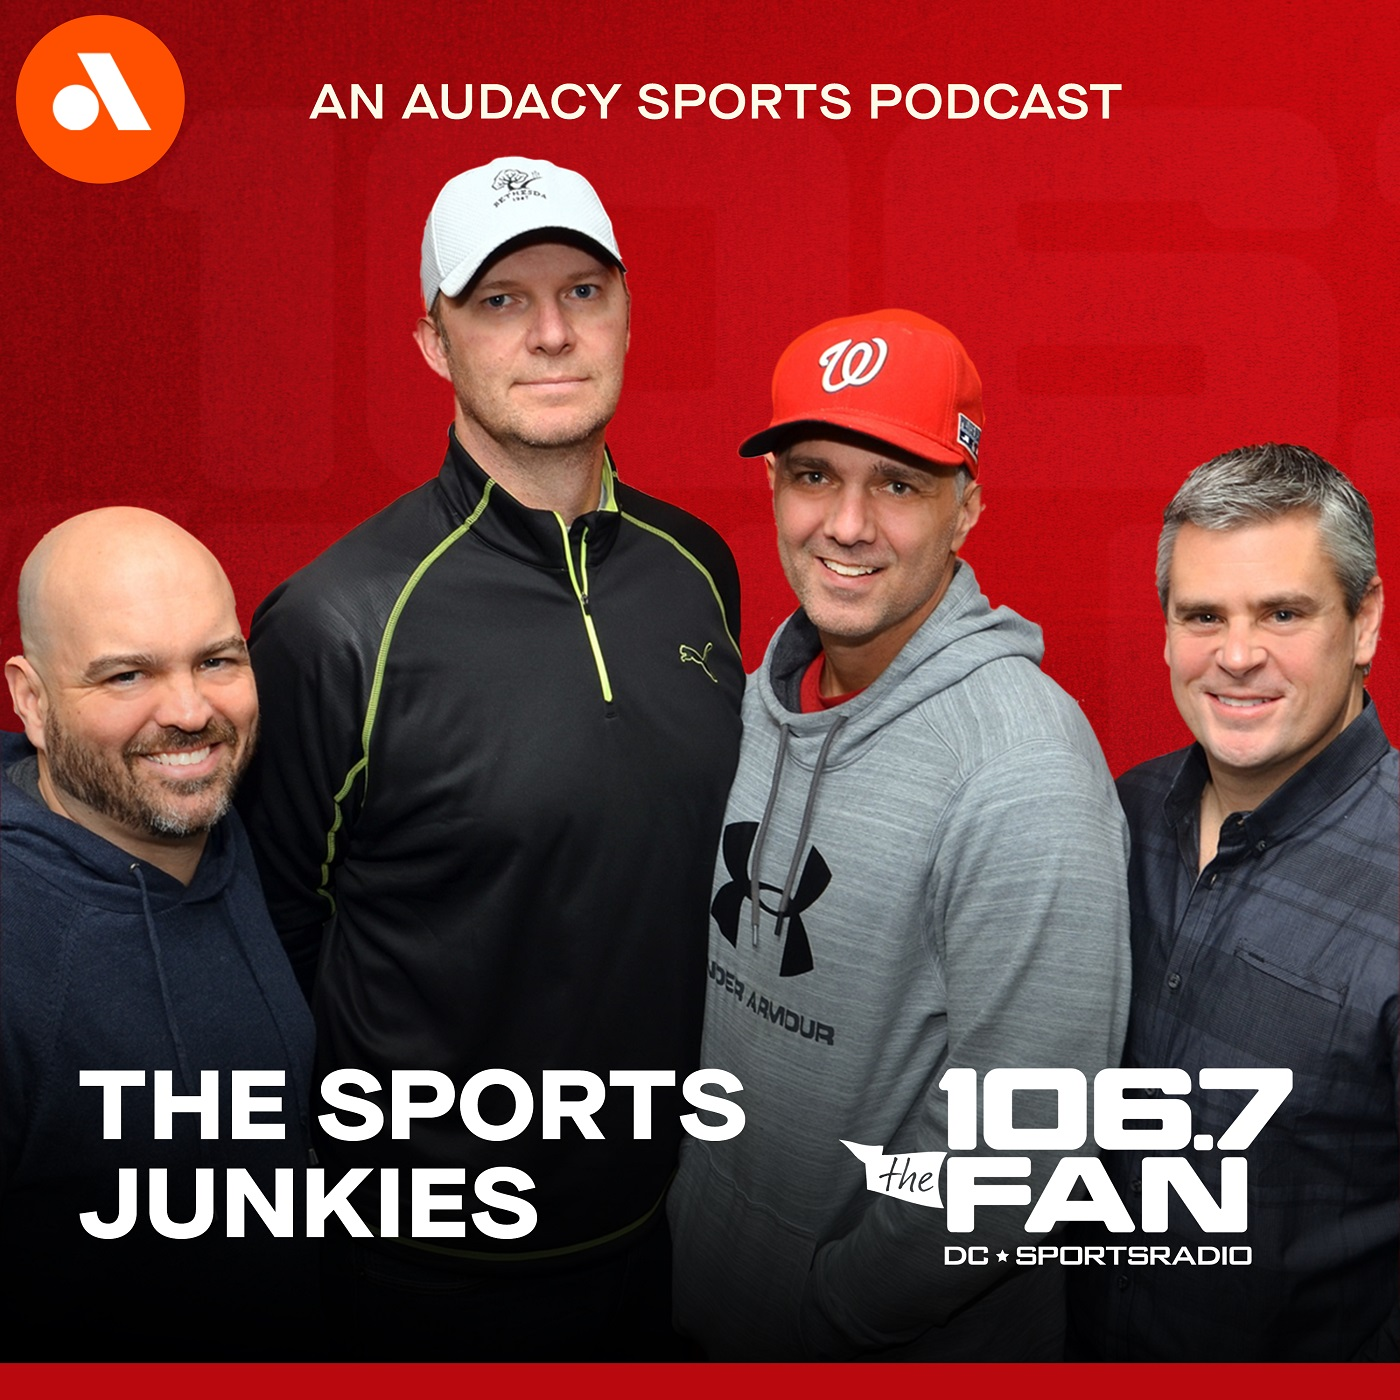 Sports Junkies 25th Anniversary Podcast: Cakes' Hot Dog Challenge